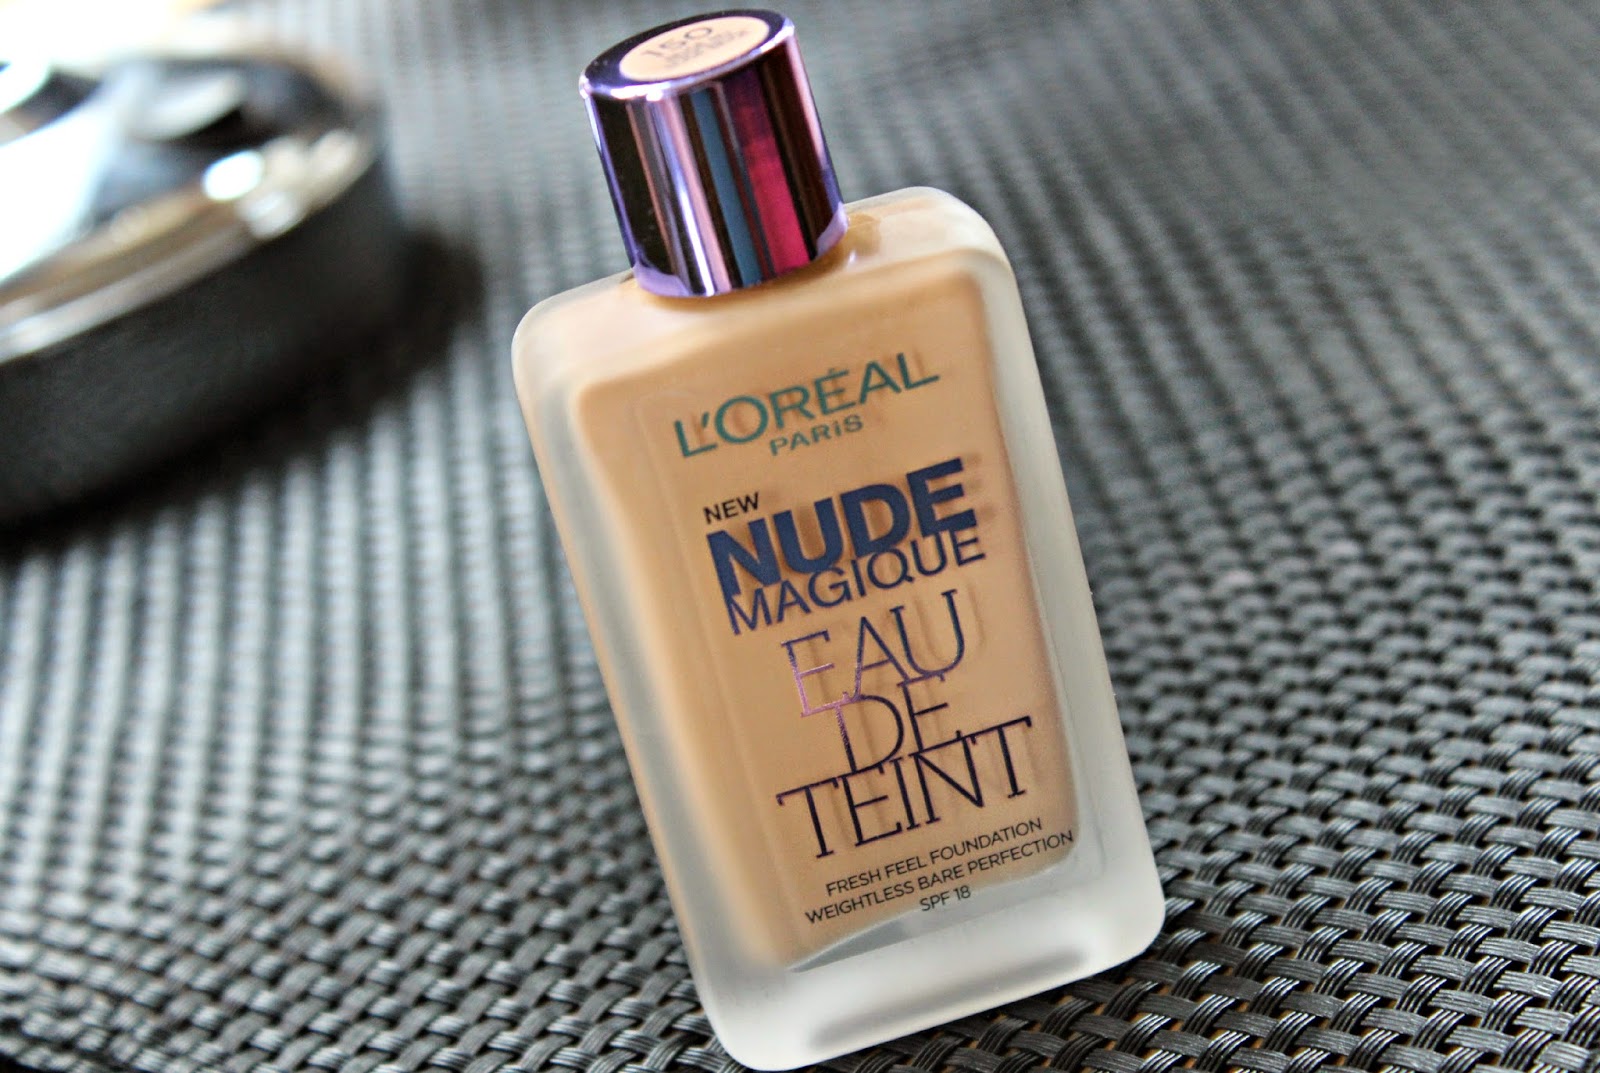 A picture of the L'Oreal Nude Magique Eau de Teint Foundation in Nude Beige